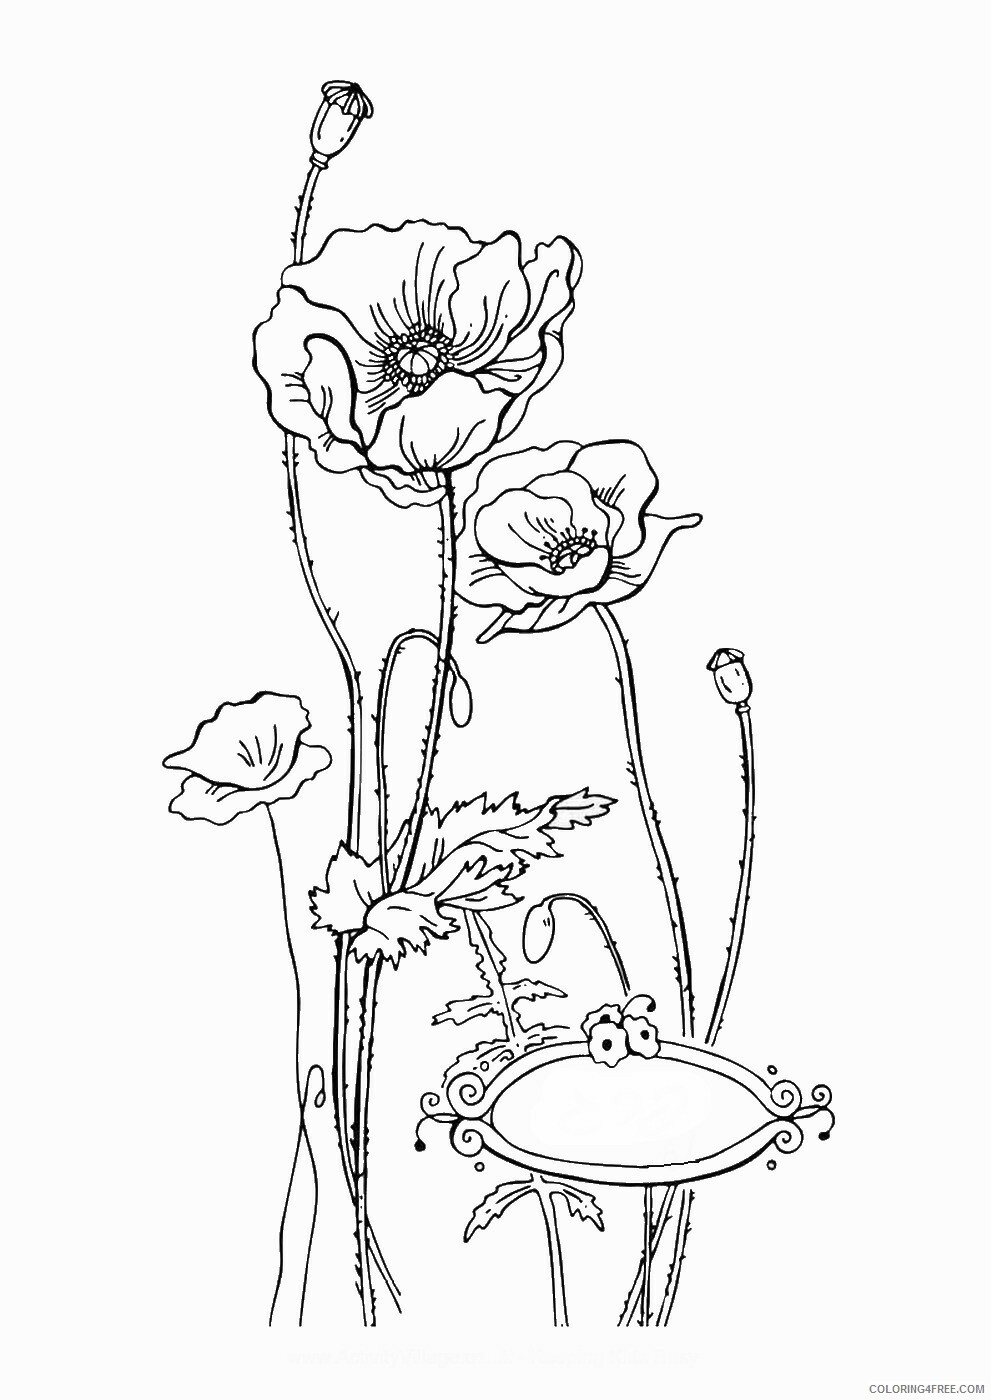 Printable Flower Coloring Pages Flowers Nature flowerc128 Printable 2021 379 Coloring4free